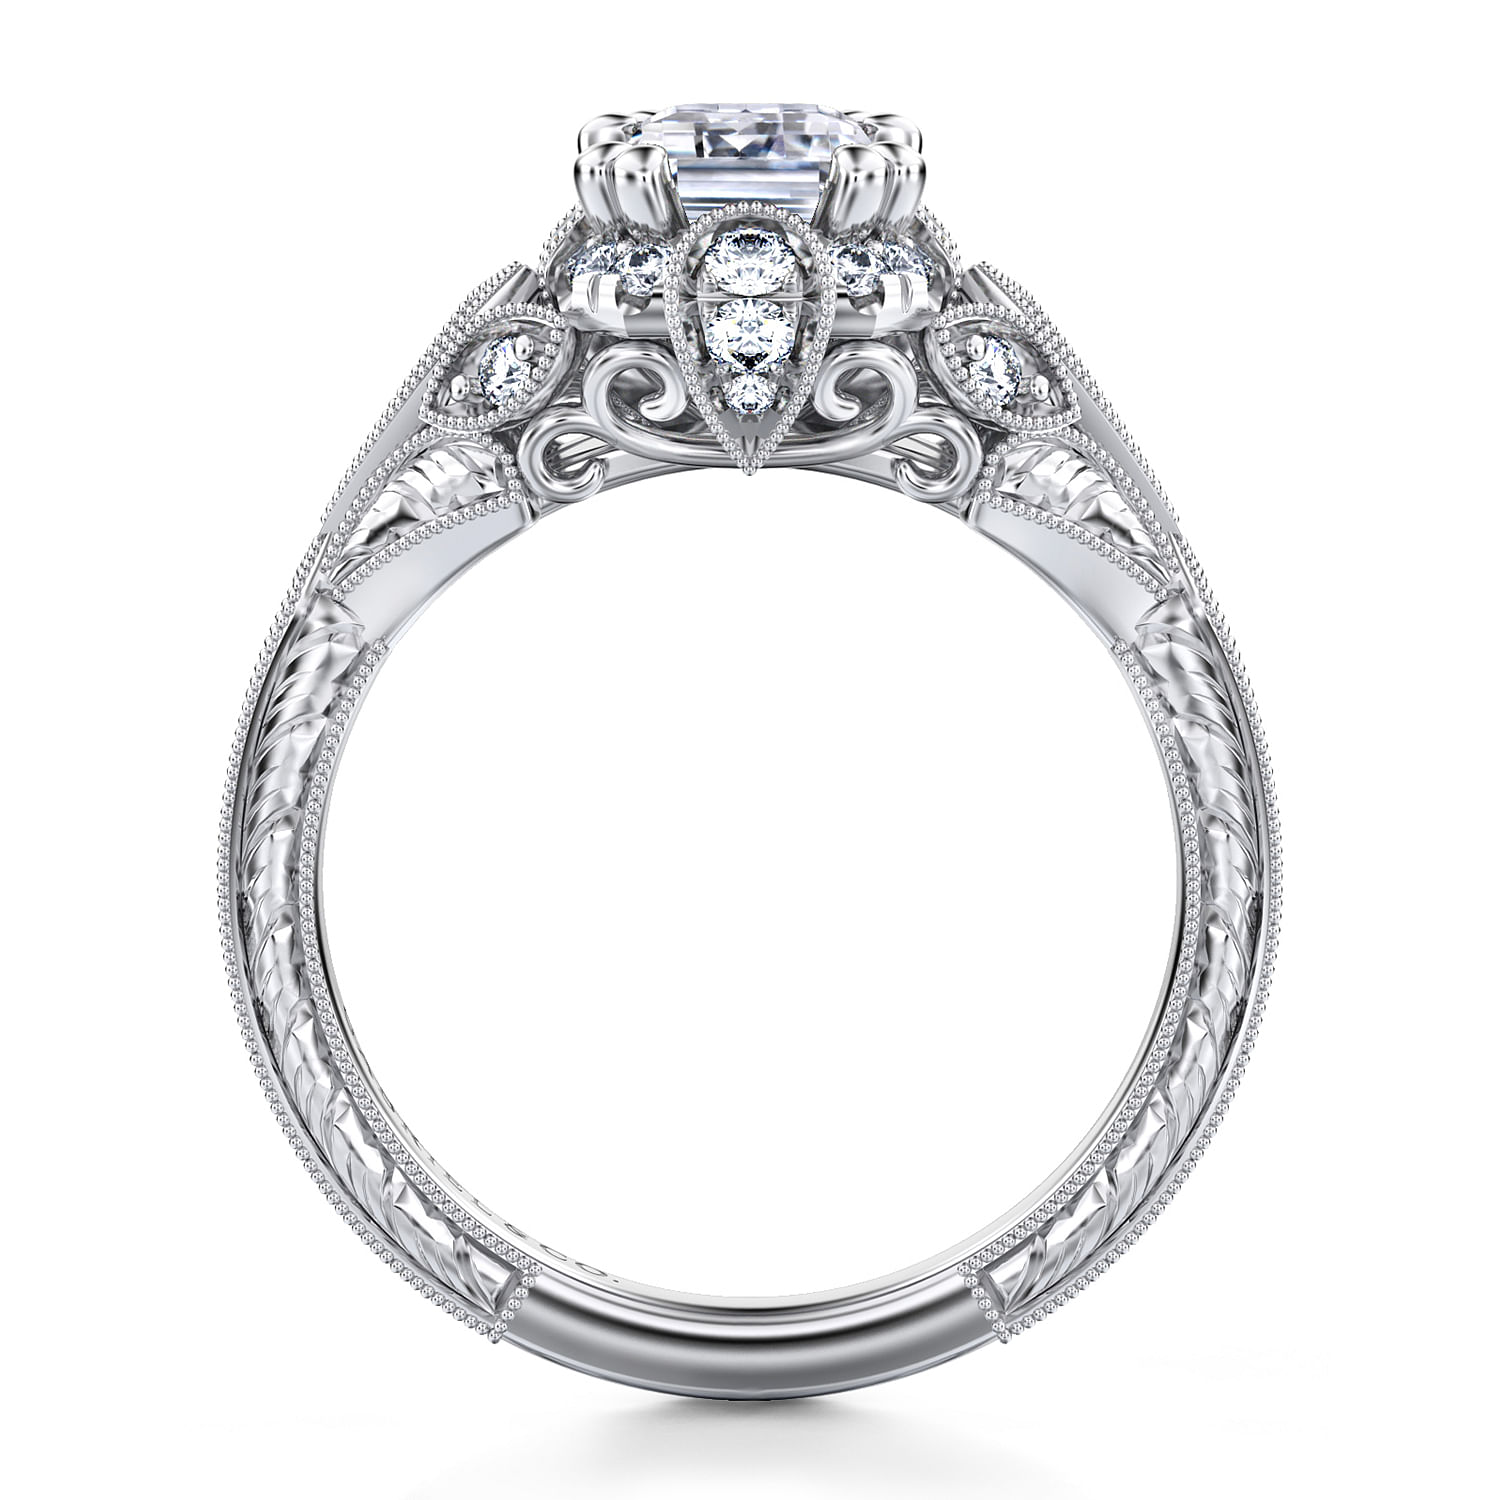 Annadale - Unique 14K White Gold Vintage Inspired Emerald Cut Diamond Halo Engagement Ring - 0.34 ct - Shot 2